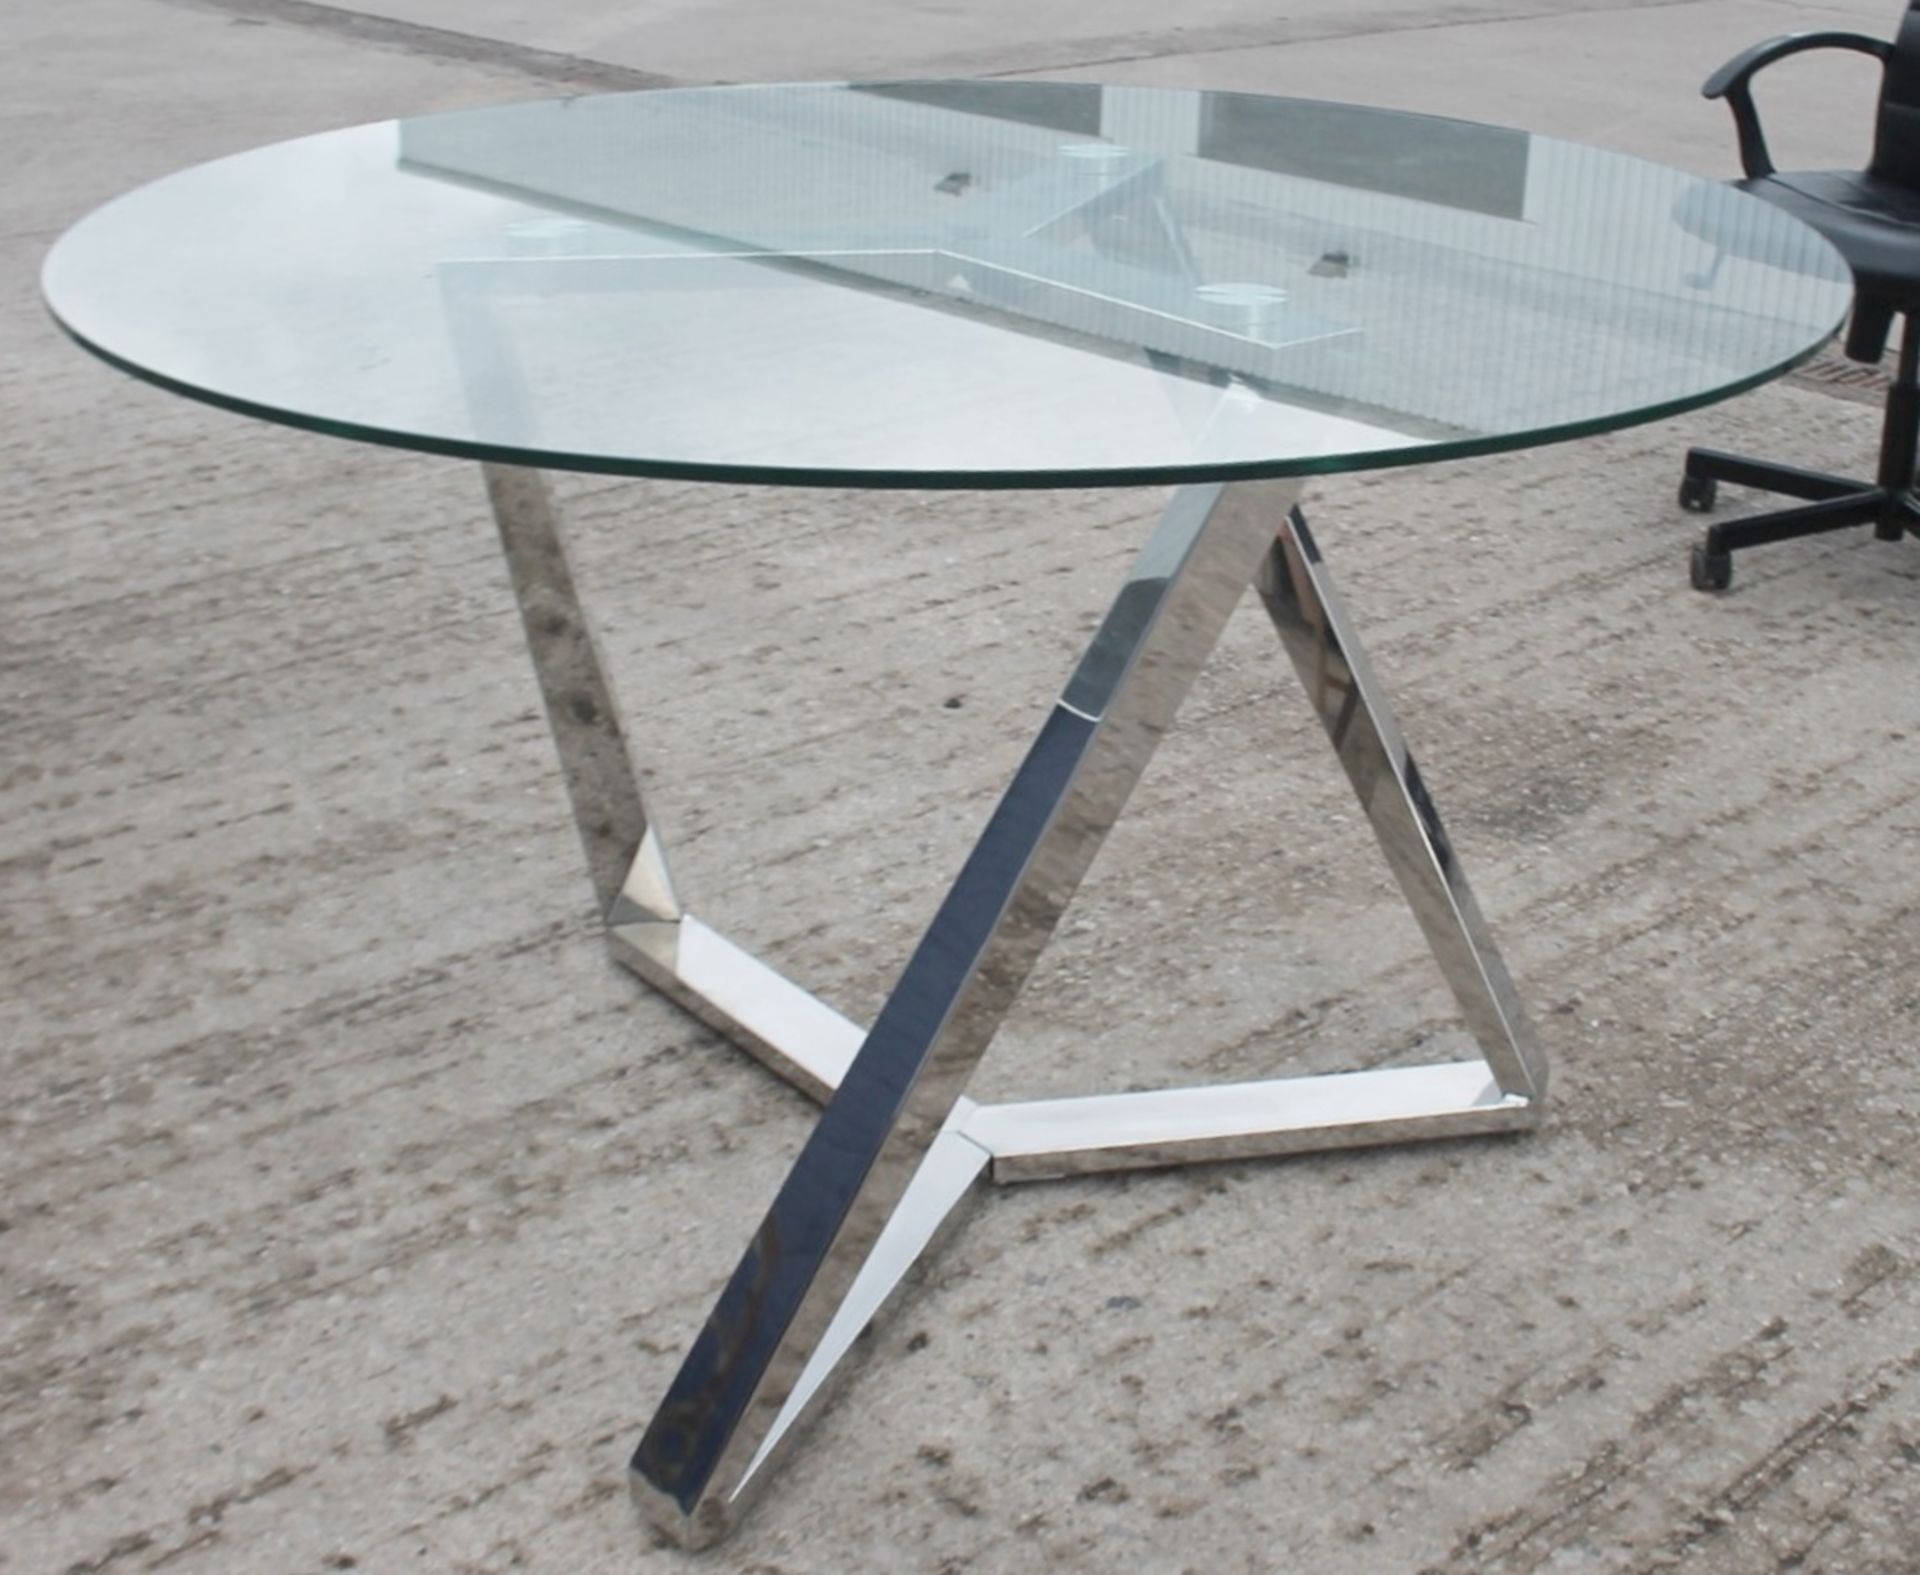 1 x Glass Topped Round Dining Tables With Angled Chrome Base - Dimensions: Ø120 x H75cm - Image 4 of 4